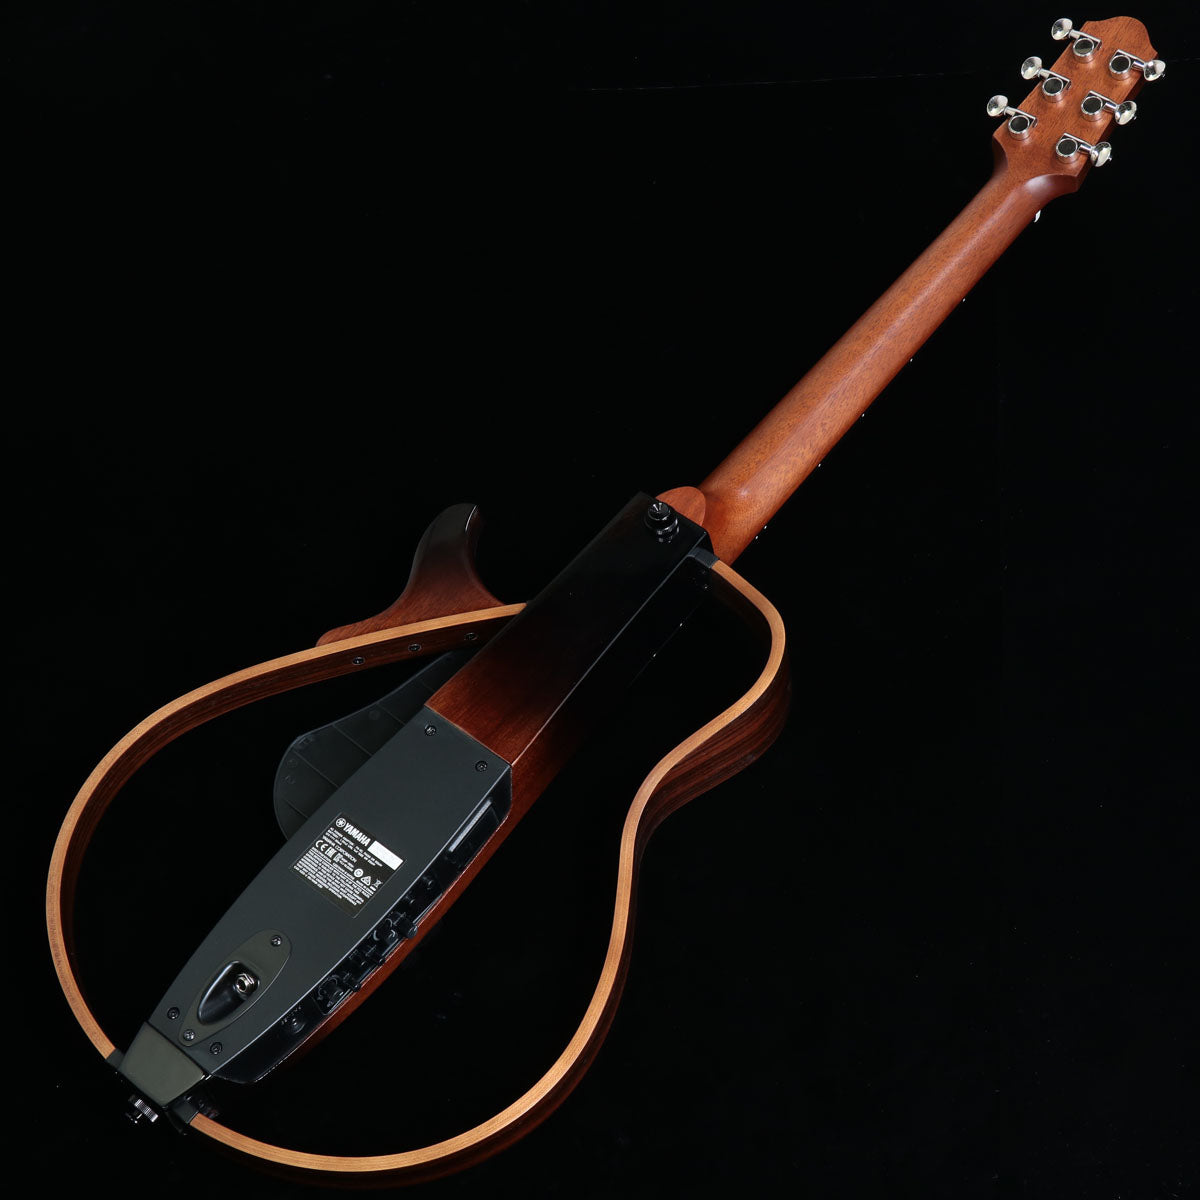 [SN IQN240210] USED YAMAHA / SLG200S TBS Steel string specification Yamaha Silent Guitar Eleaco Acoustic Guitar [08]